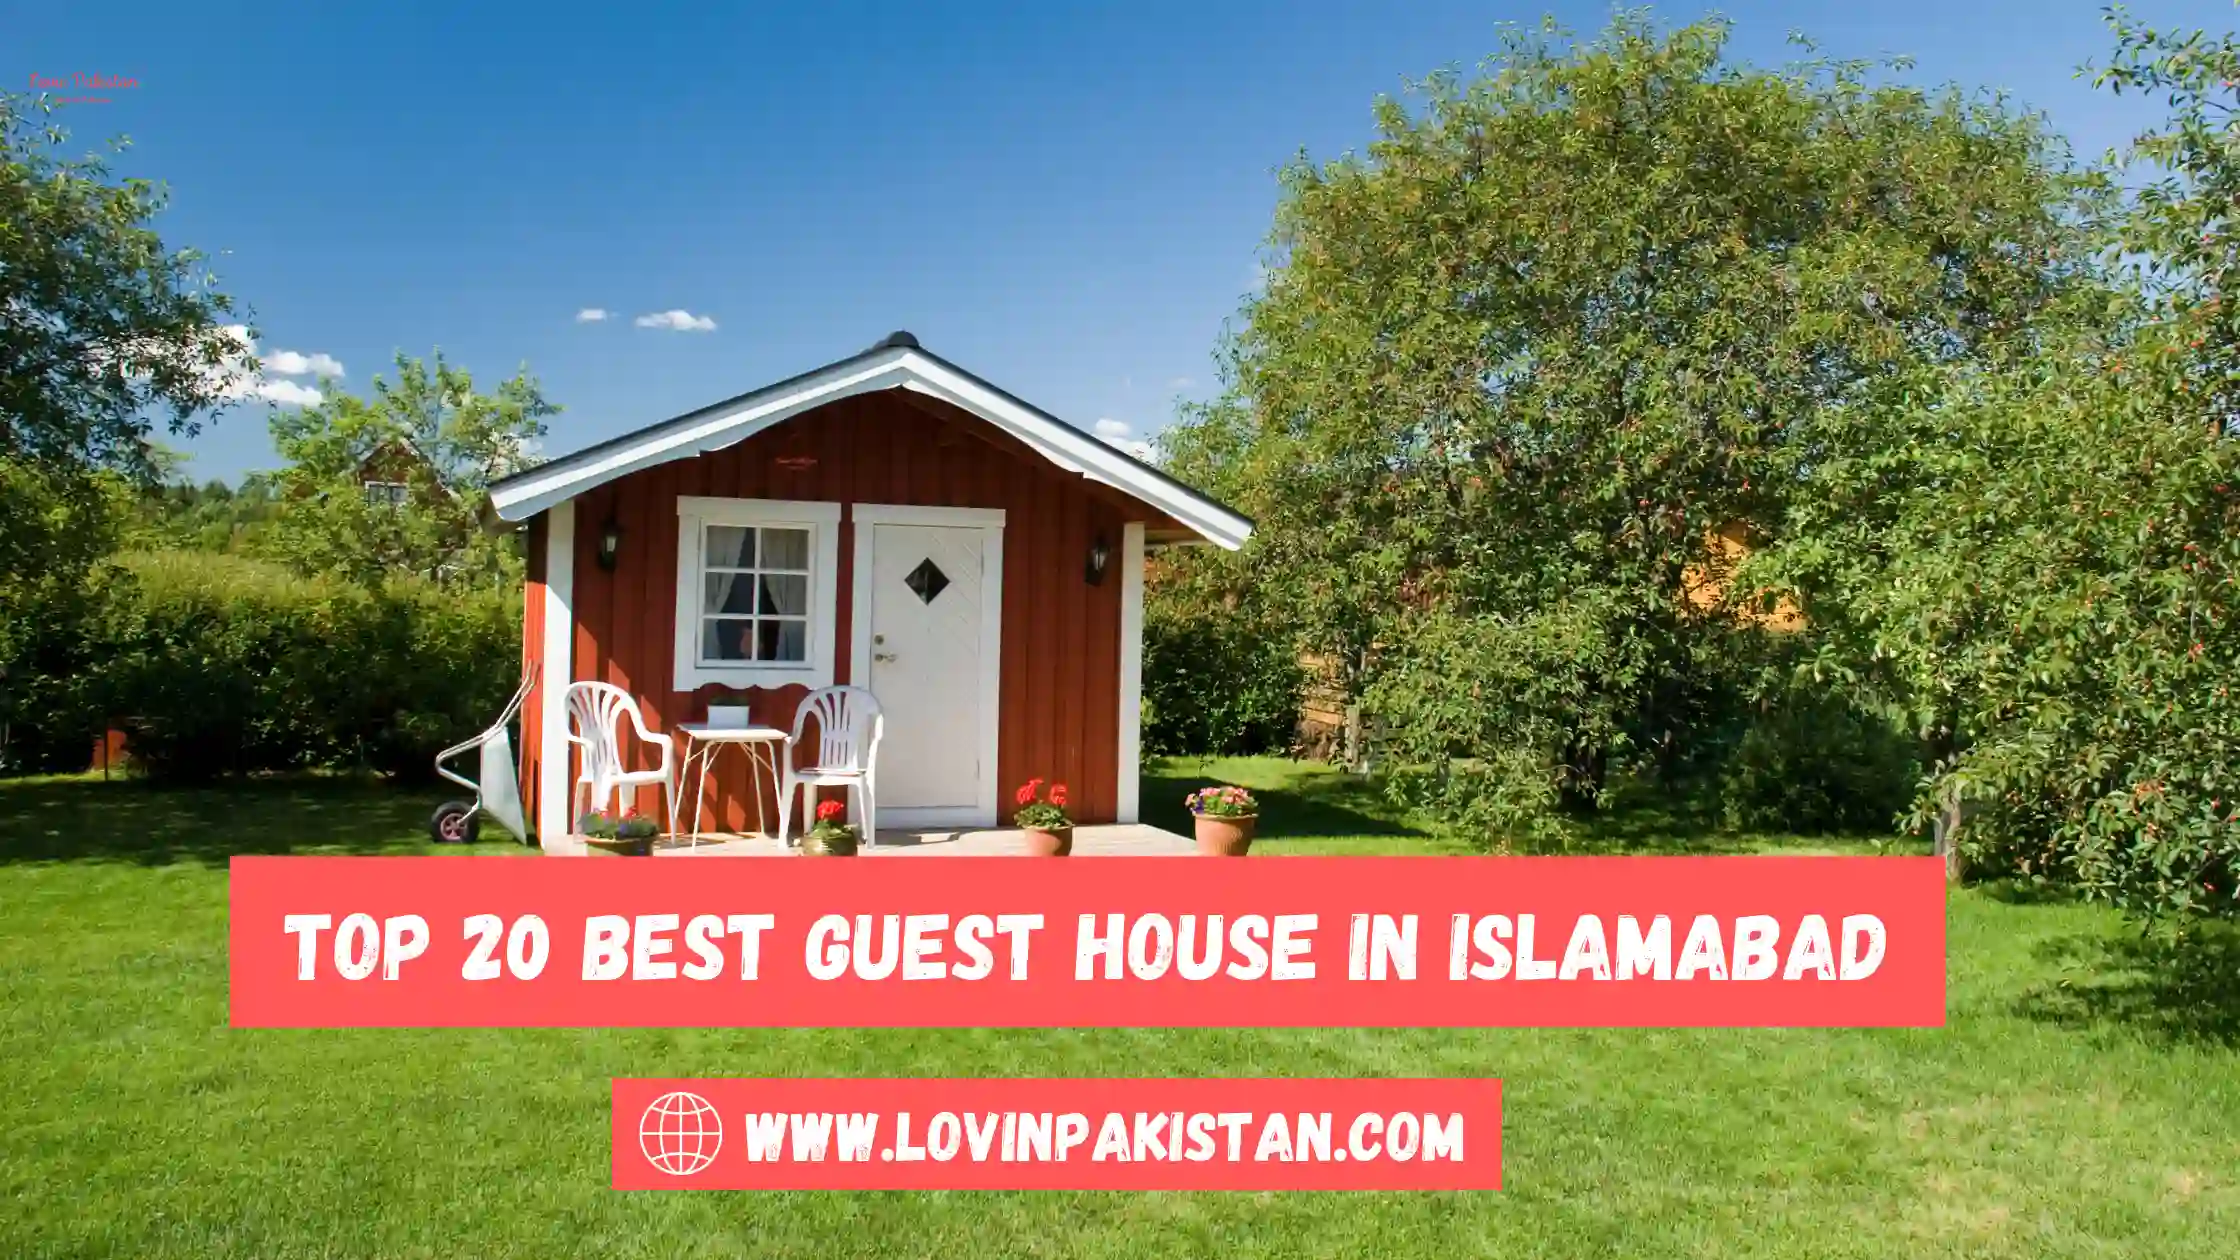 Top 20 Best Guest House in Islamabad